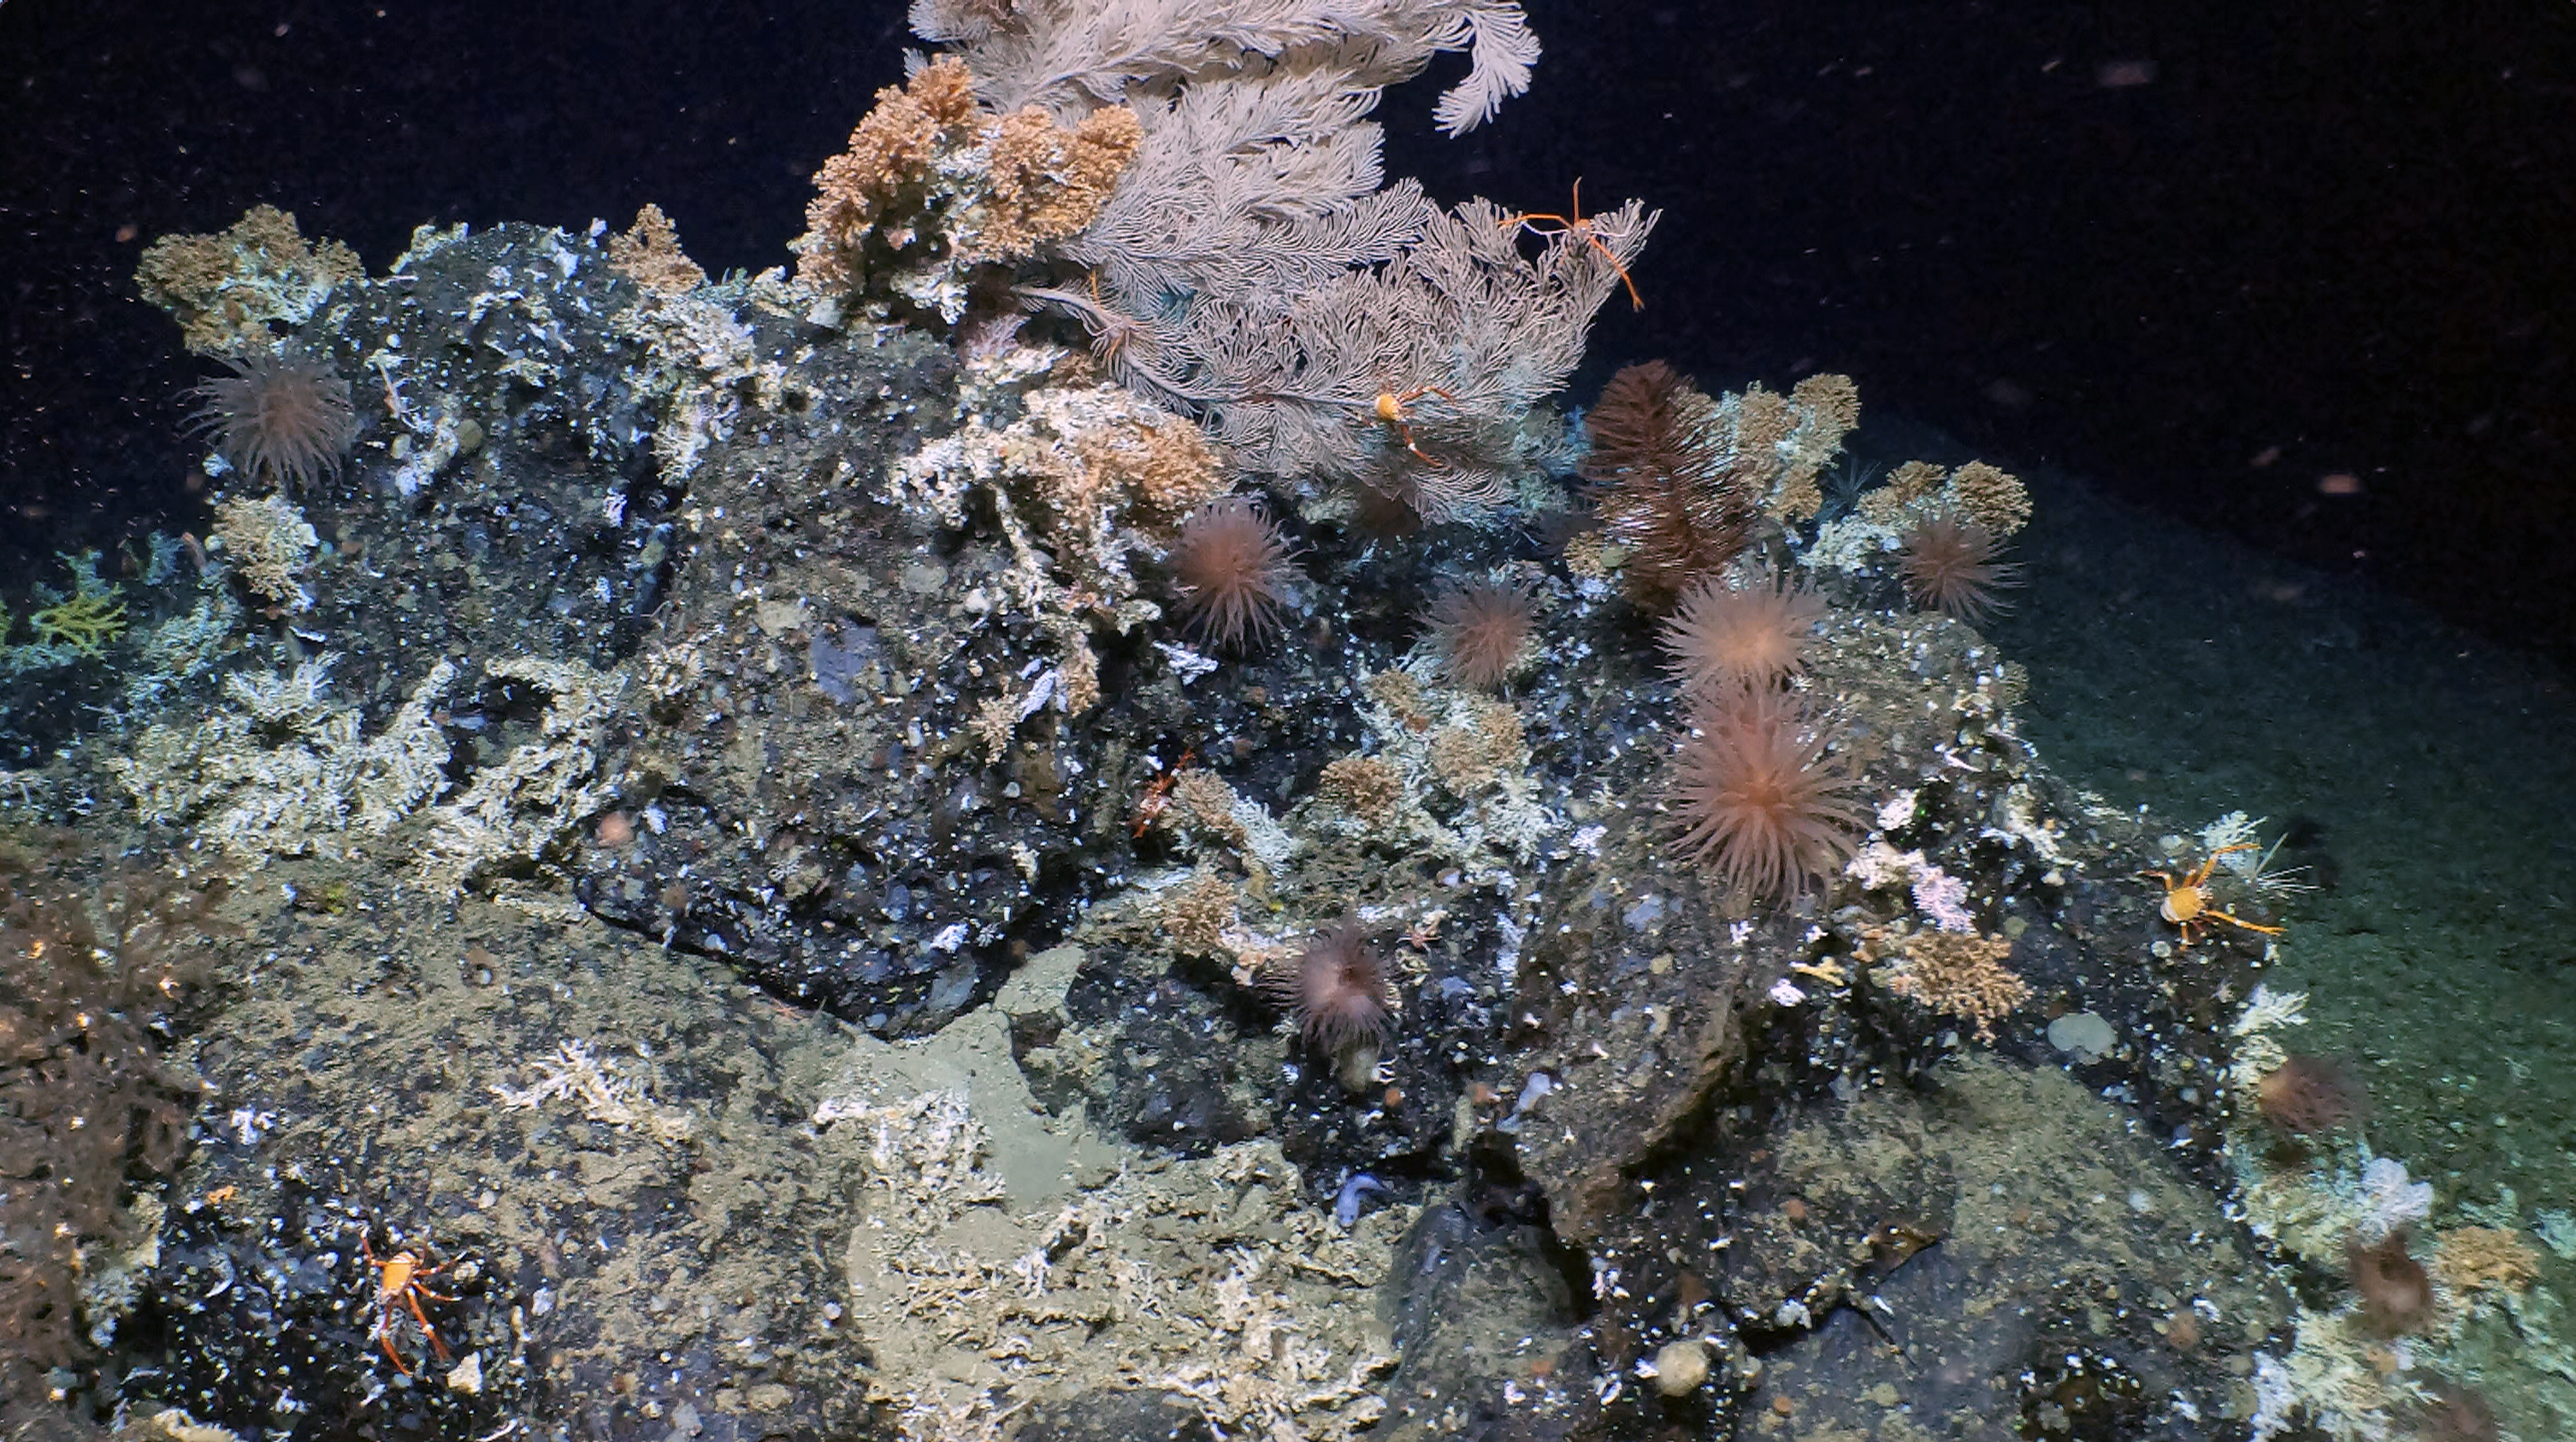 Rocky outcrop at the crest of a ridge, populated by cold water corals, squat lobsters, anemones, basket stars and deep-sea fish. (Photo: Rocky outcrop at the crest of a ridge, populated by cold water corals, squat lobsters, anemones, basket stars and deep-sea fish.)